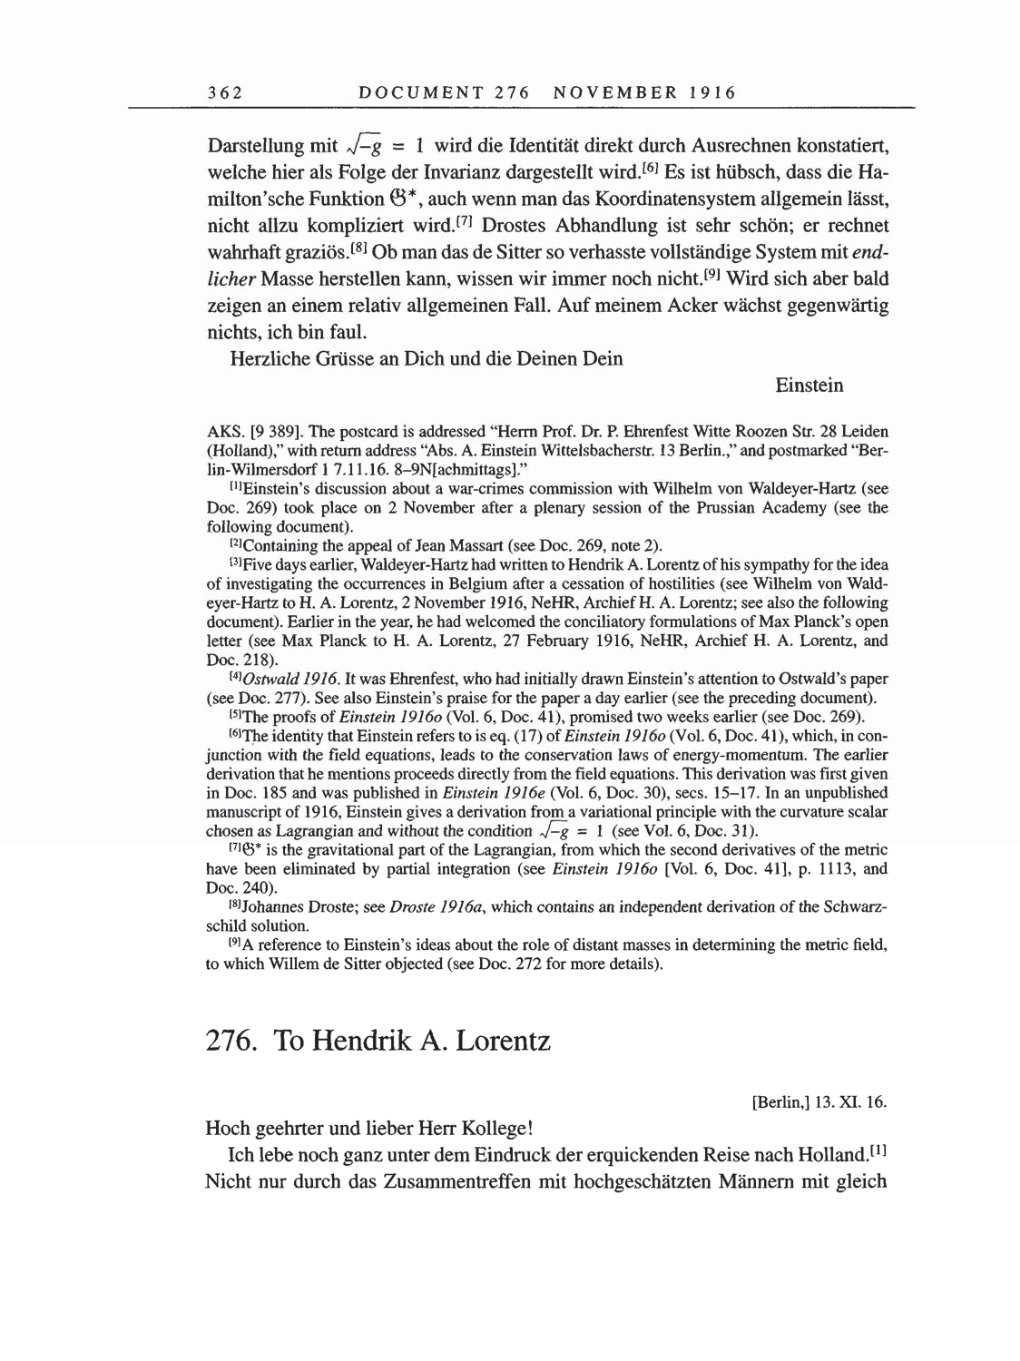 Volume 8, Part A: The Berlin Years: Correspondence 1914-1917 page 362